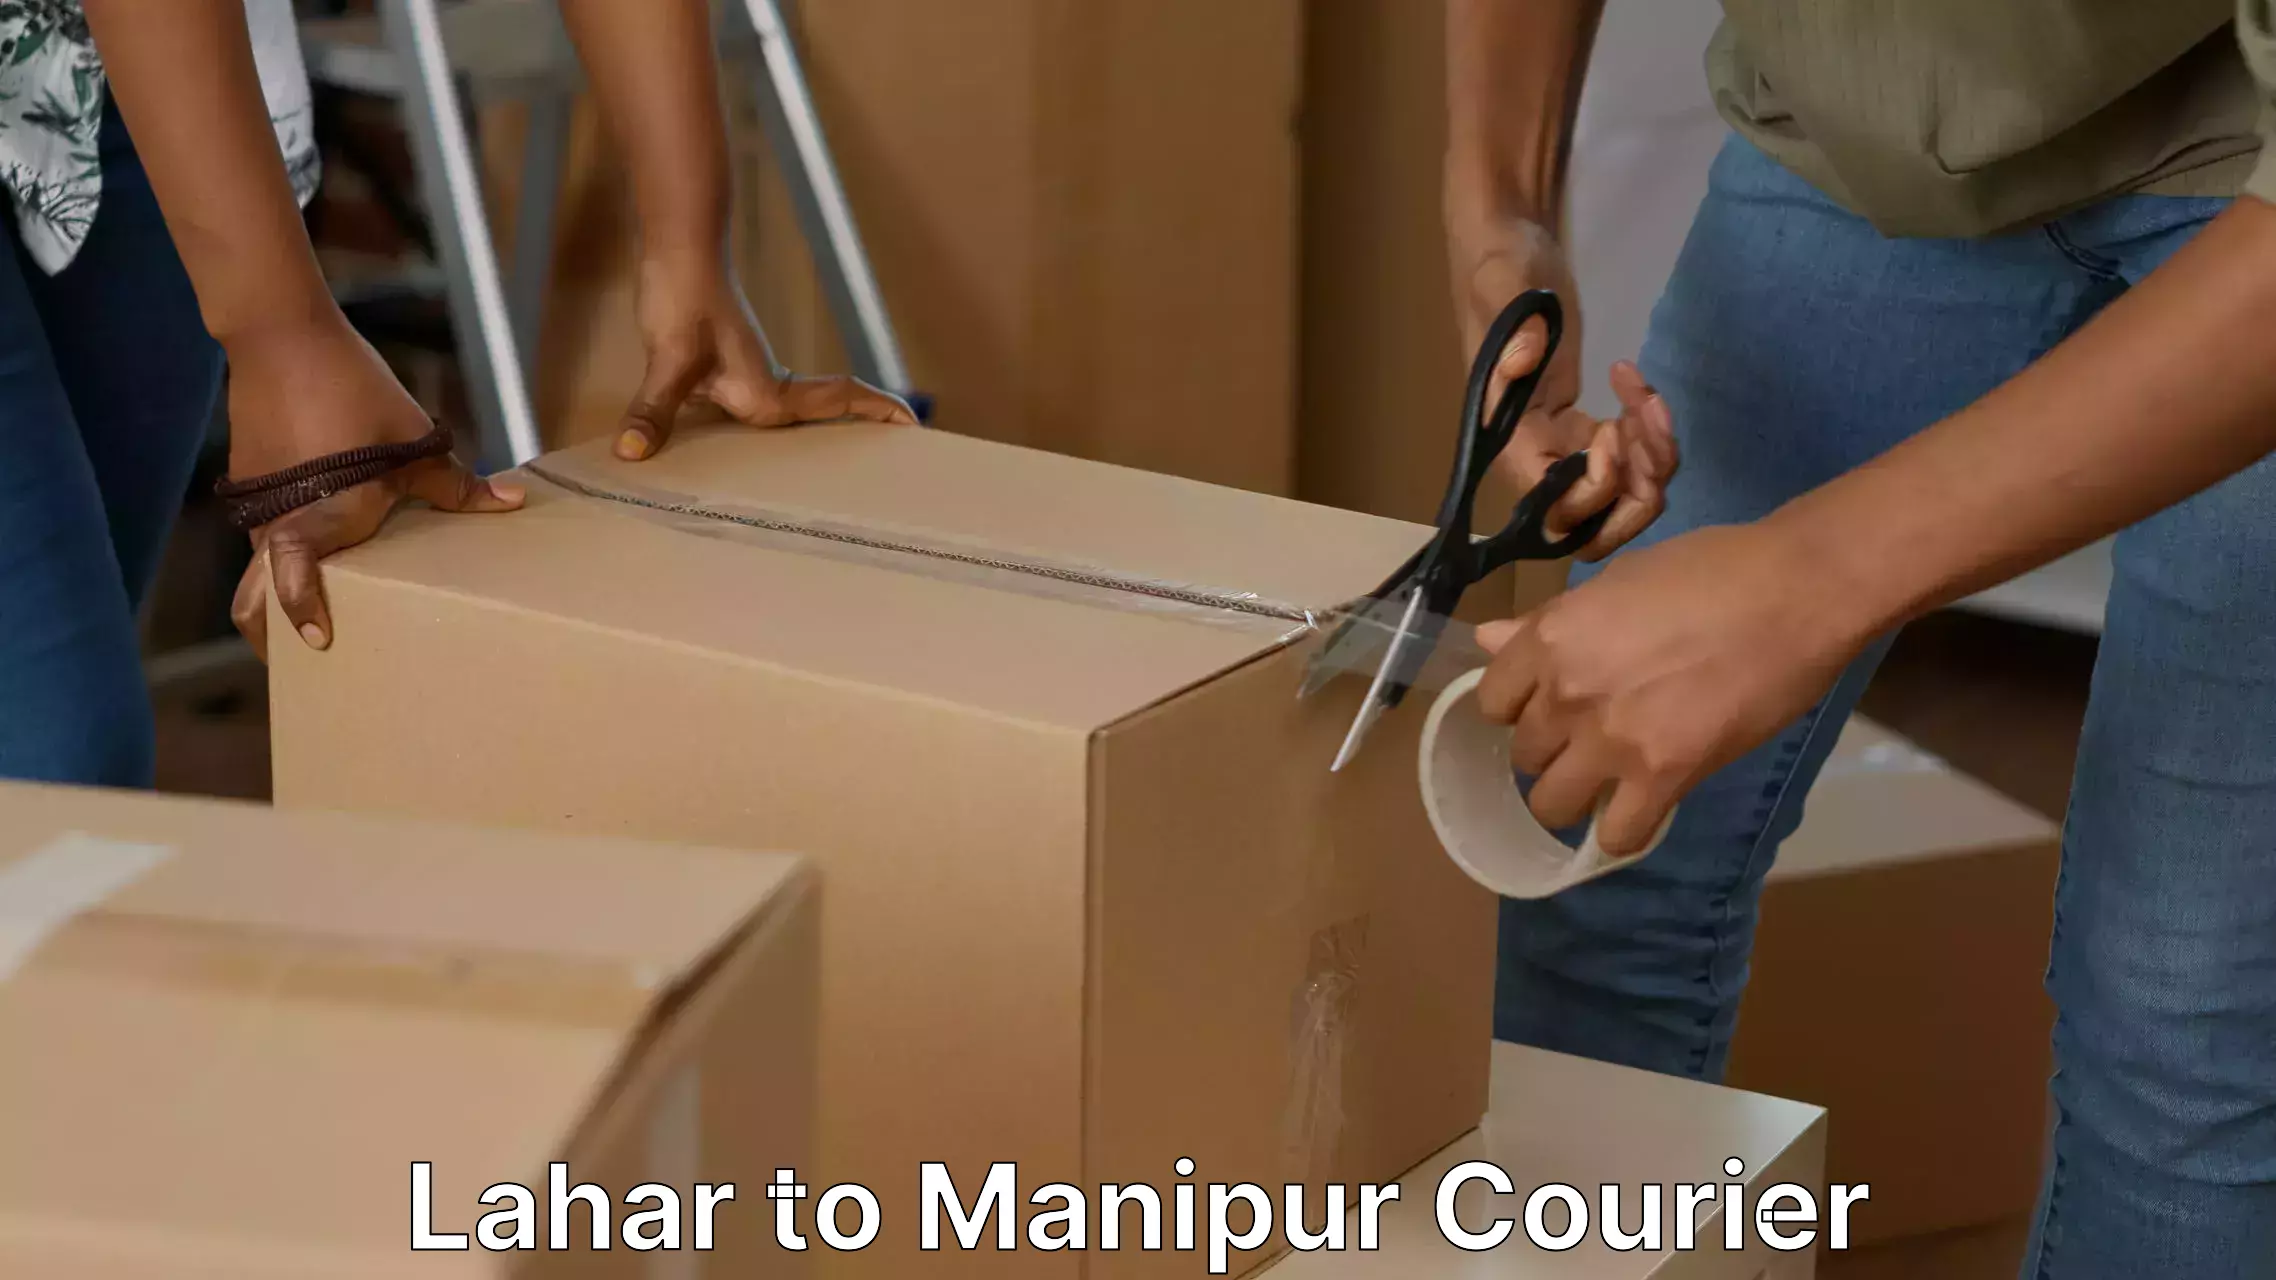 Quality moving company in Lahar to Manipur